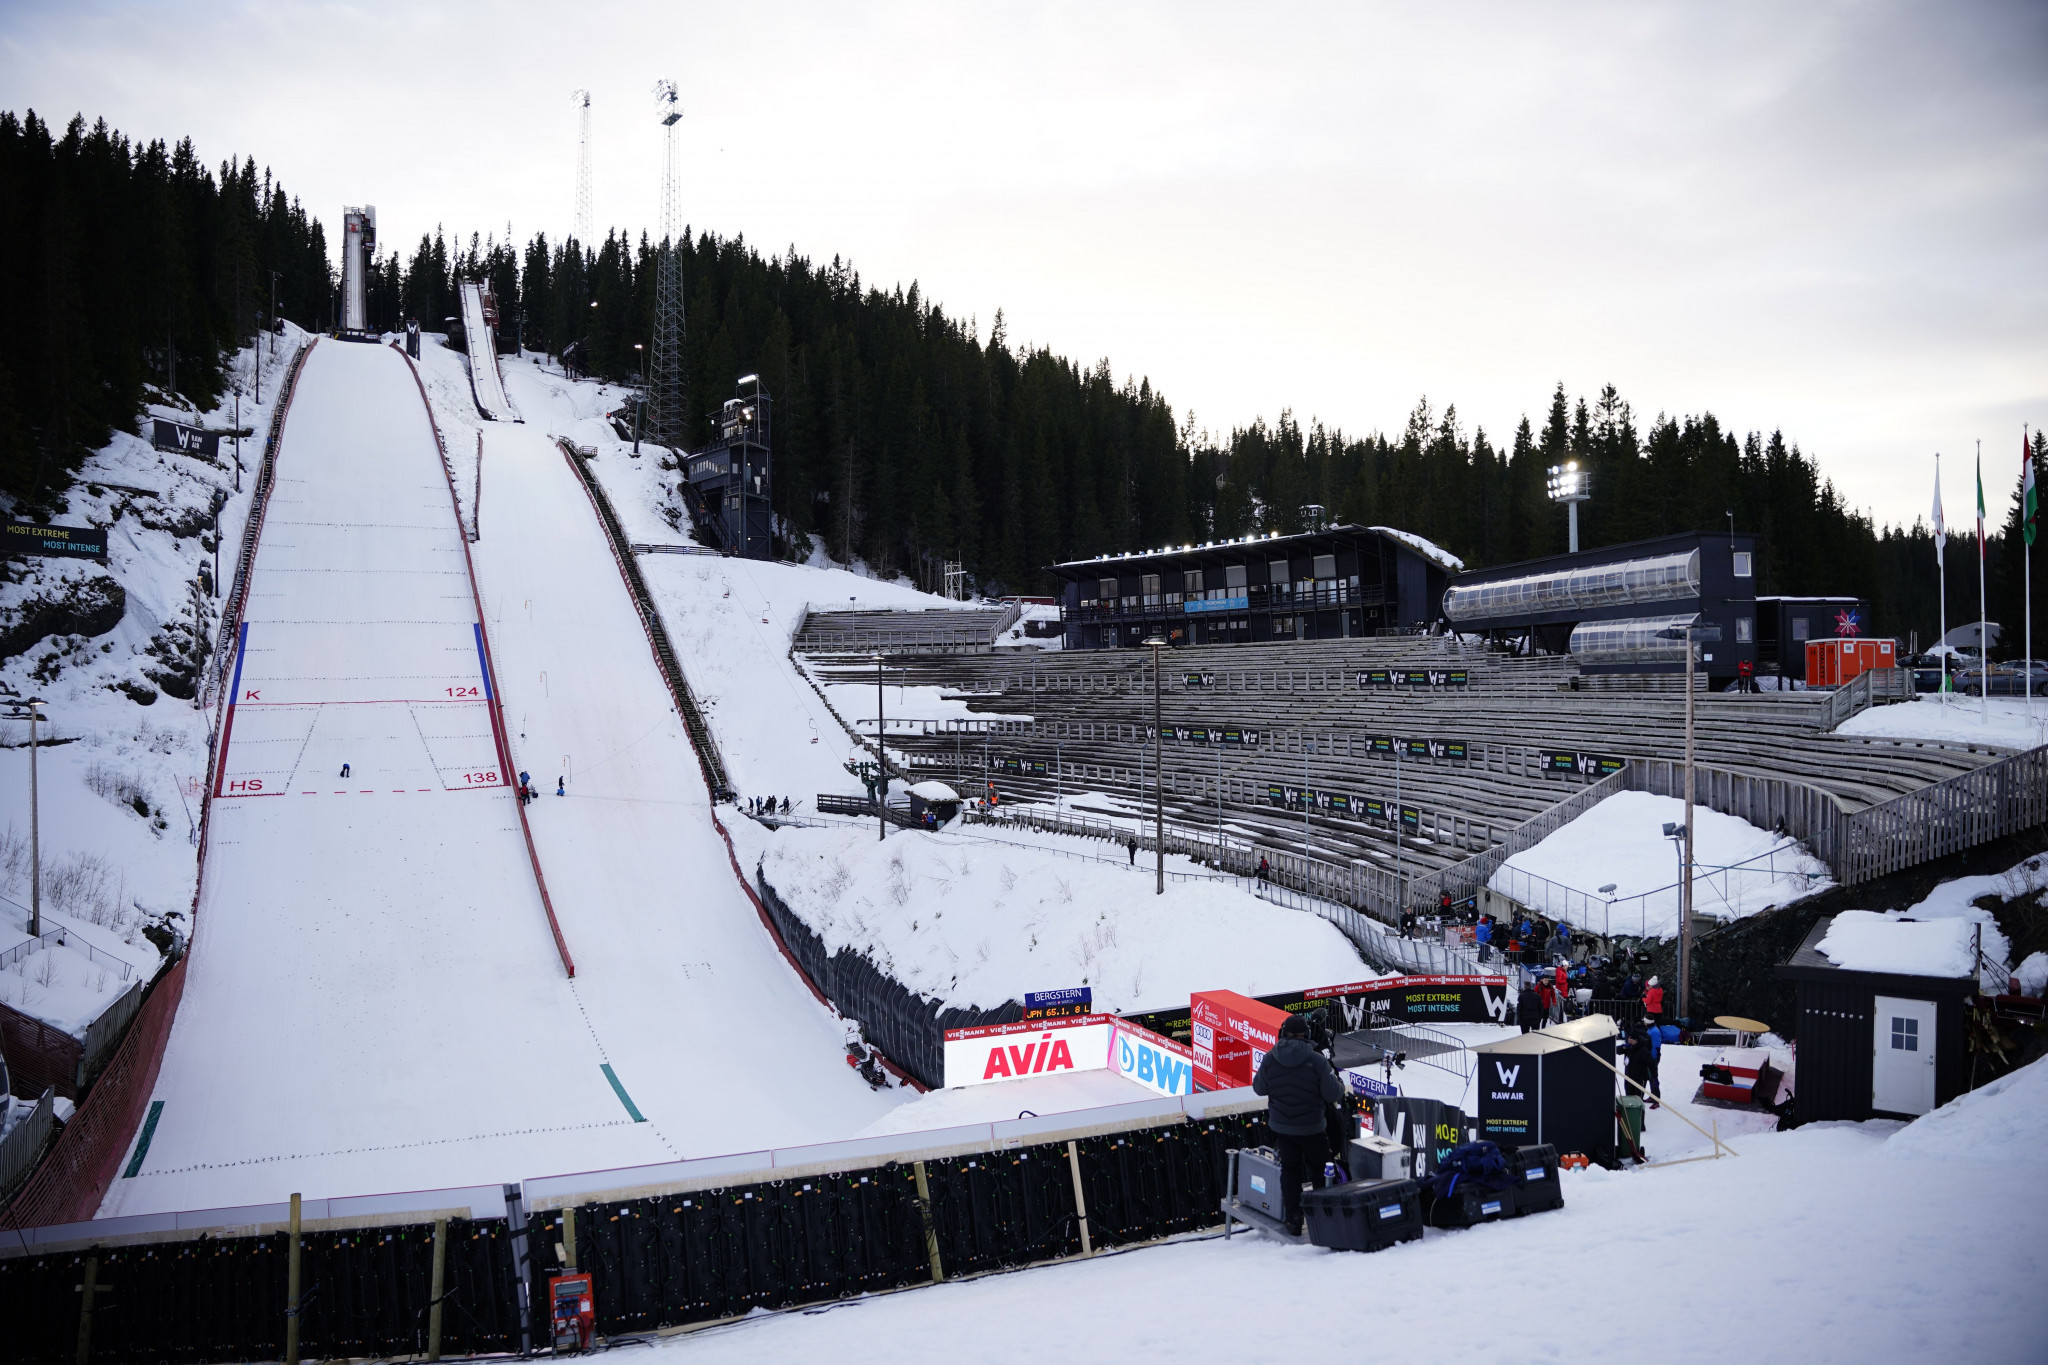 FIS hold meetings with 2025 World Championship organisers Trondheim and Saalbach